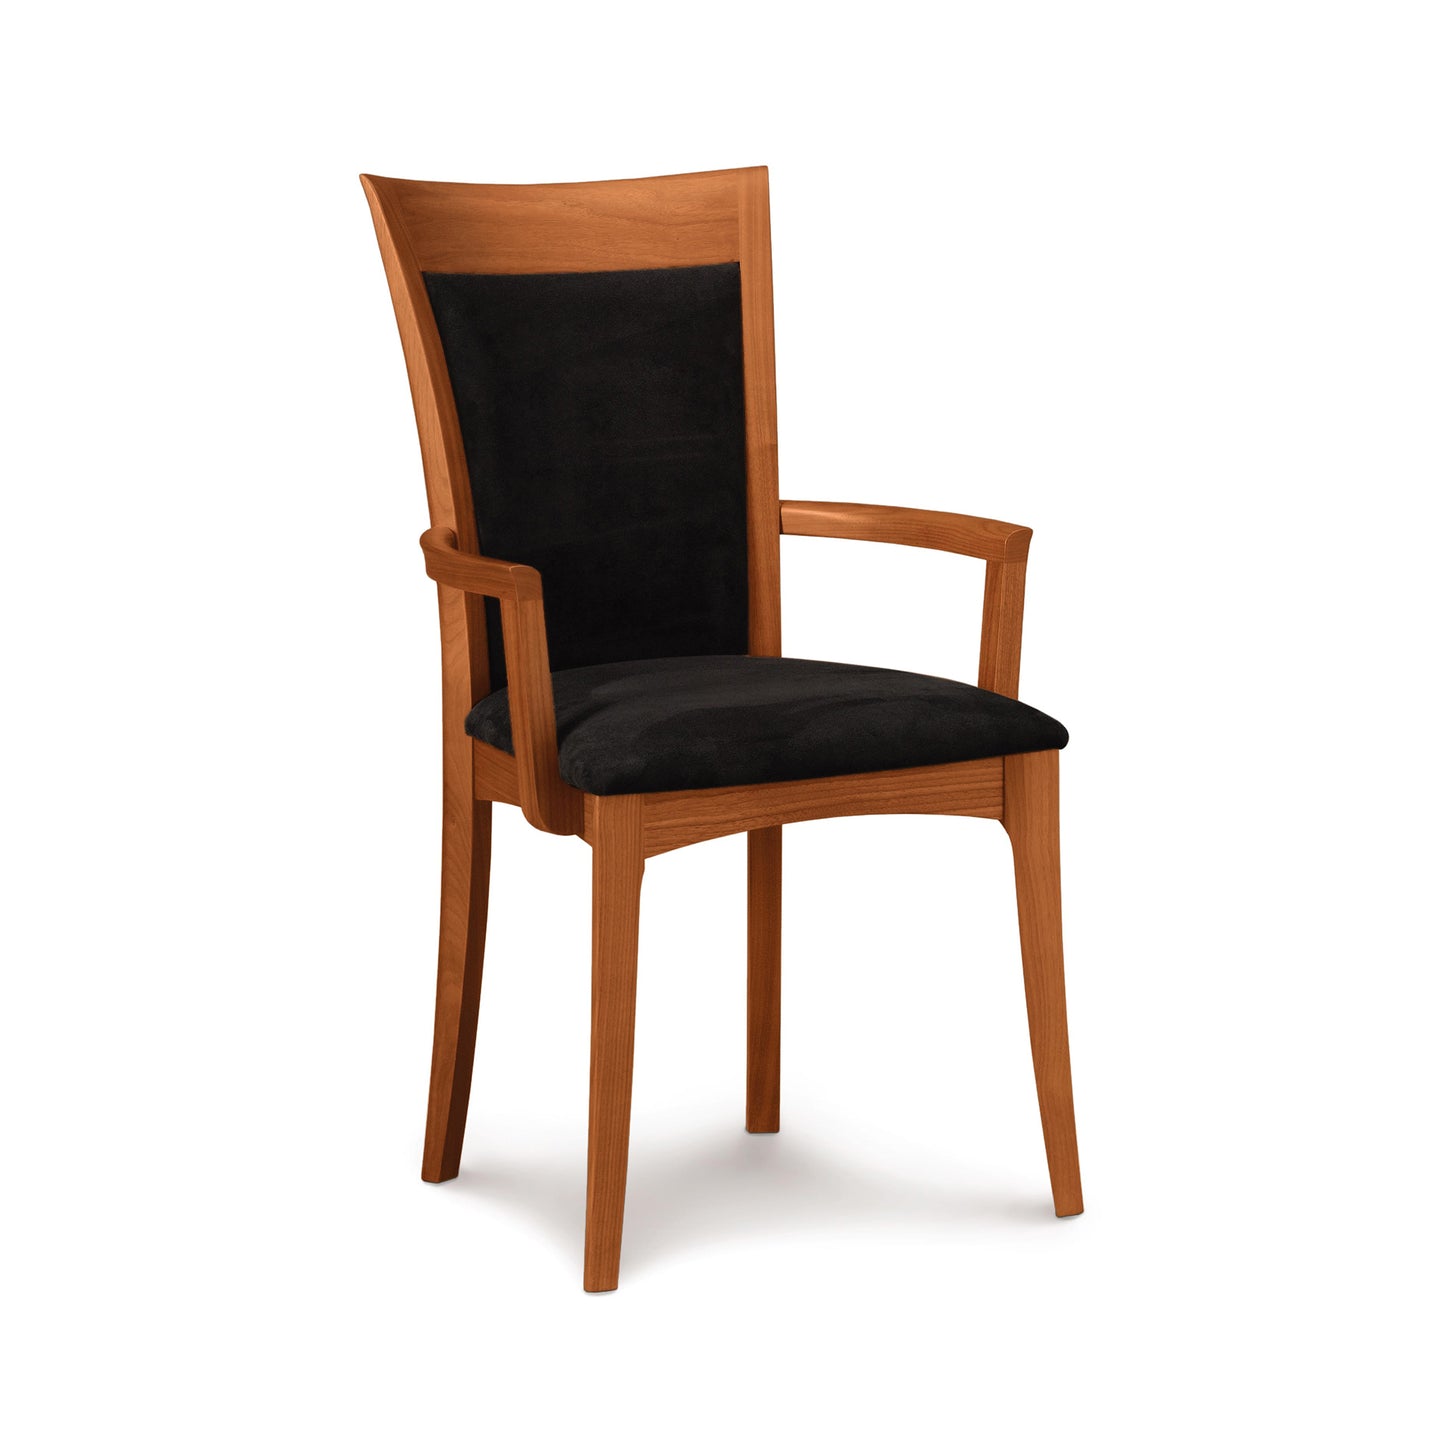 A Morgan Shaker Chair by Copeland Furniture with a black upholstered seat and backrest, isolated on a white background.